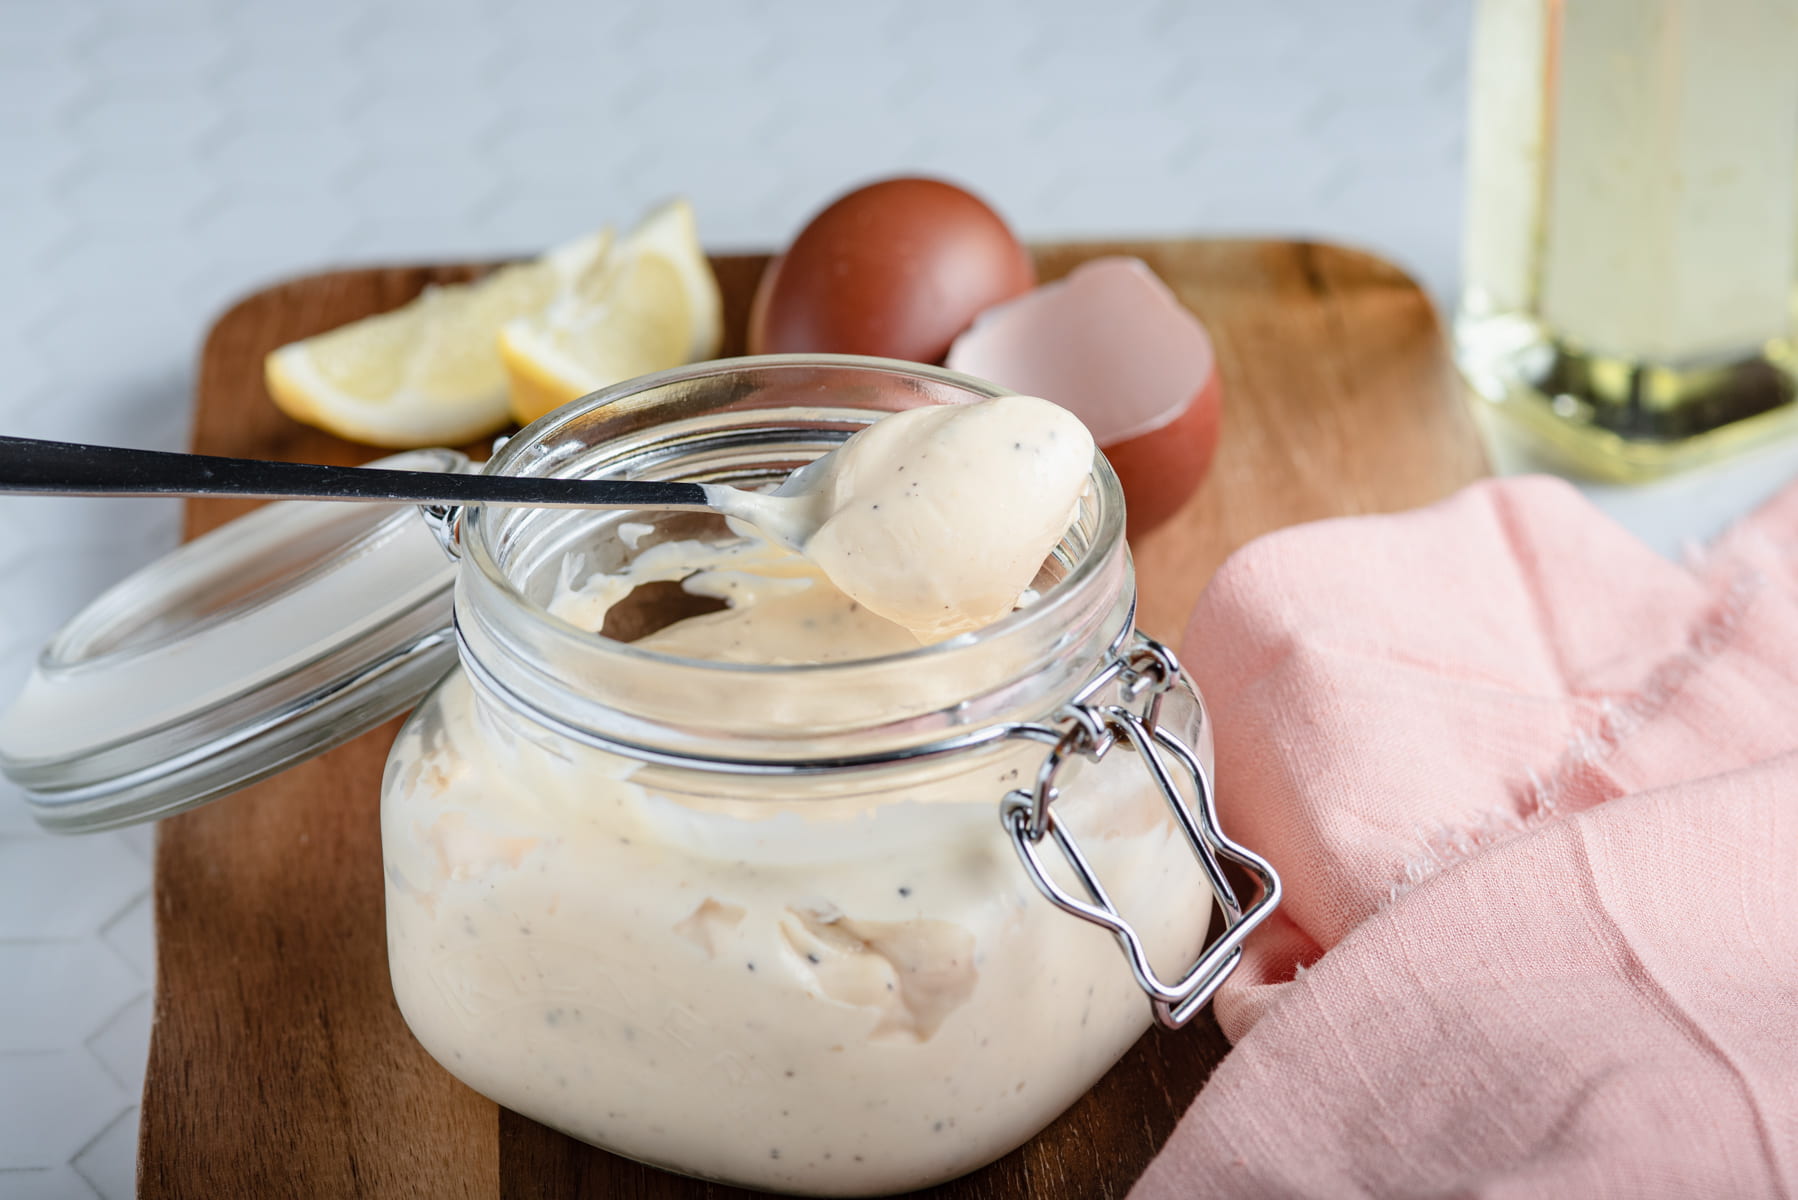 A jar of homemade mayonnaise with lemon slices and eggs to the back on a wooden board in a Kilner flip lid jar.